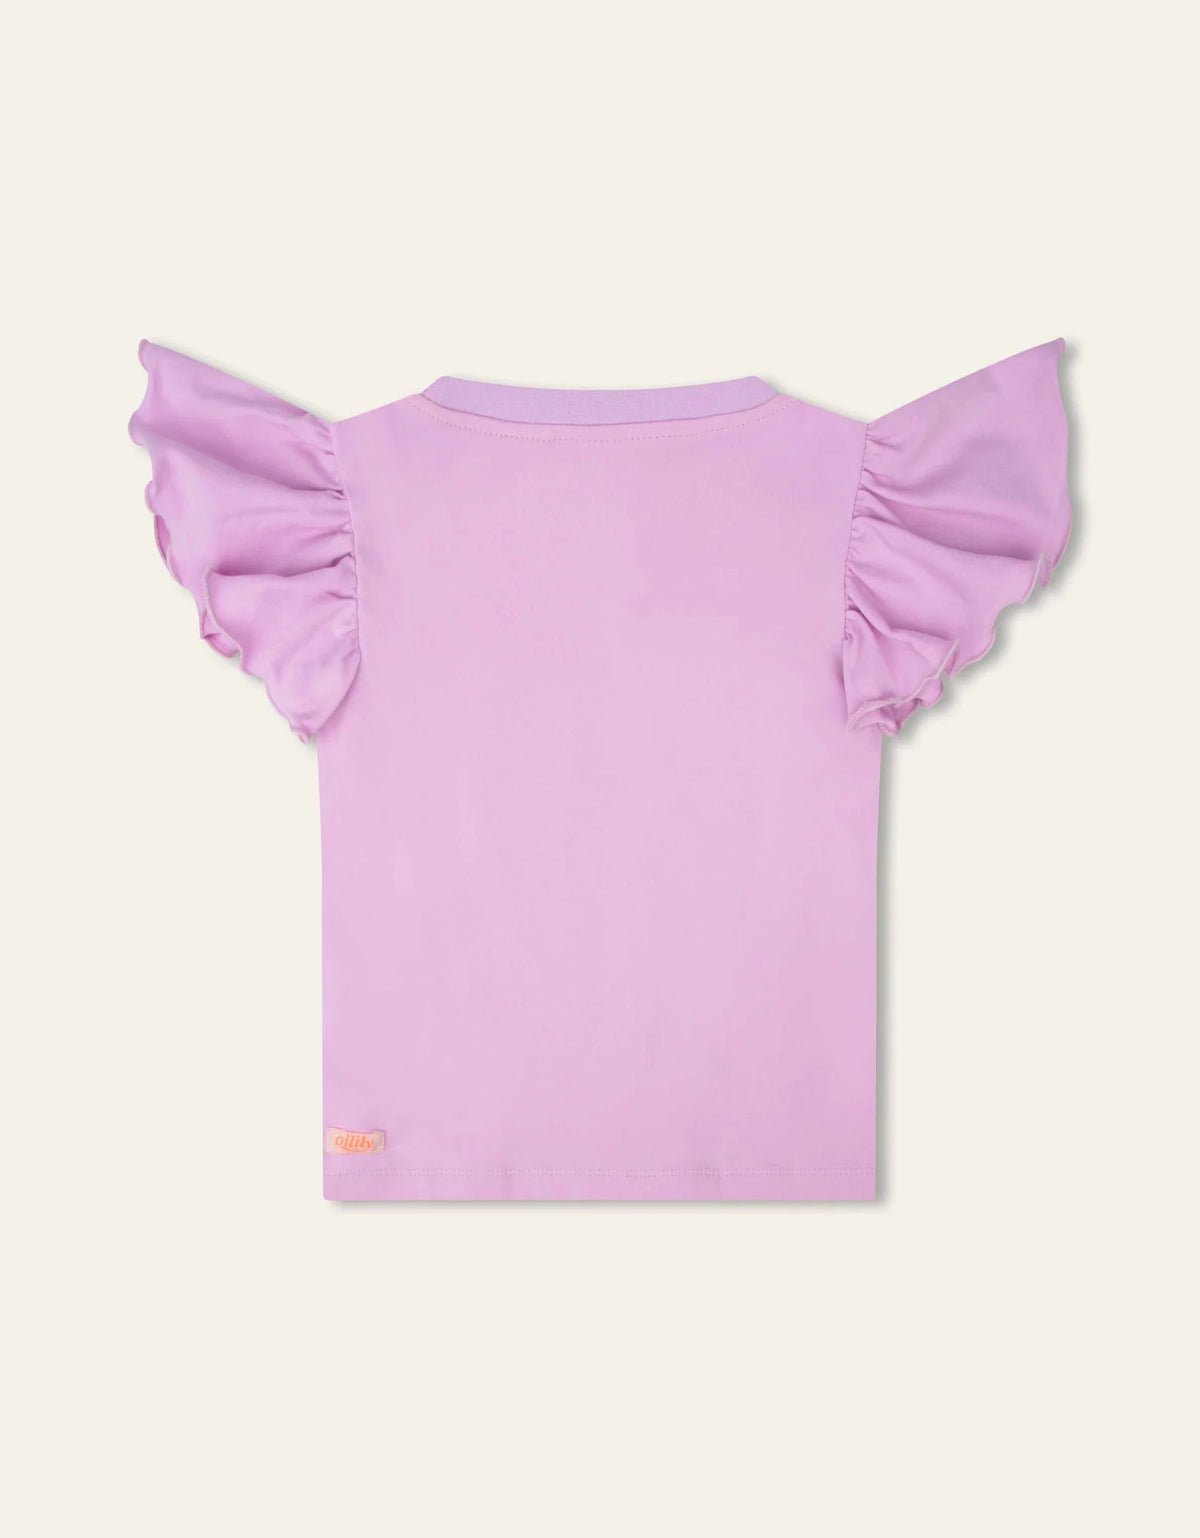 Tjancy t-shirt Lilac, Oilily